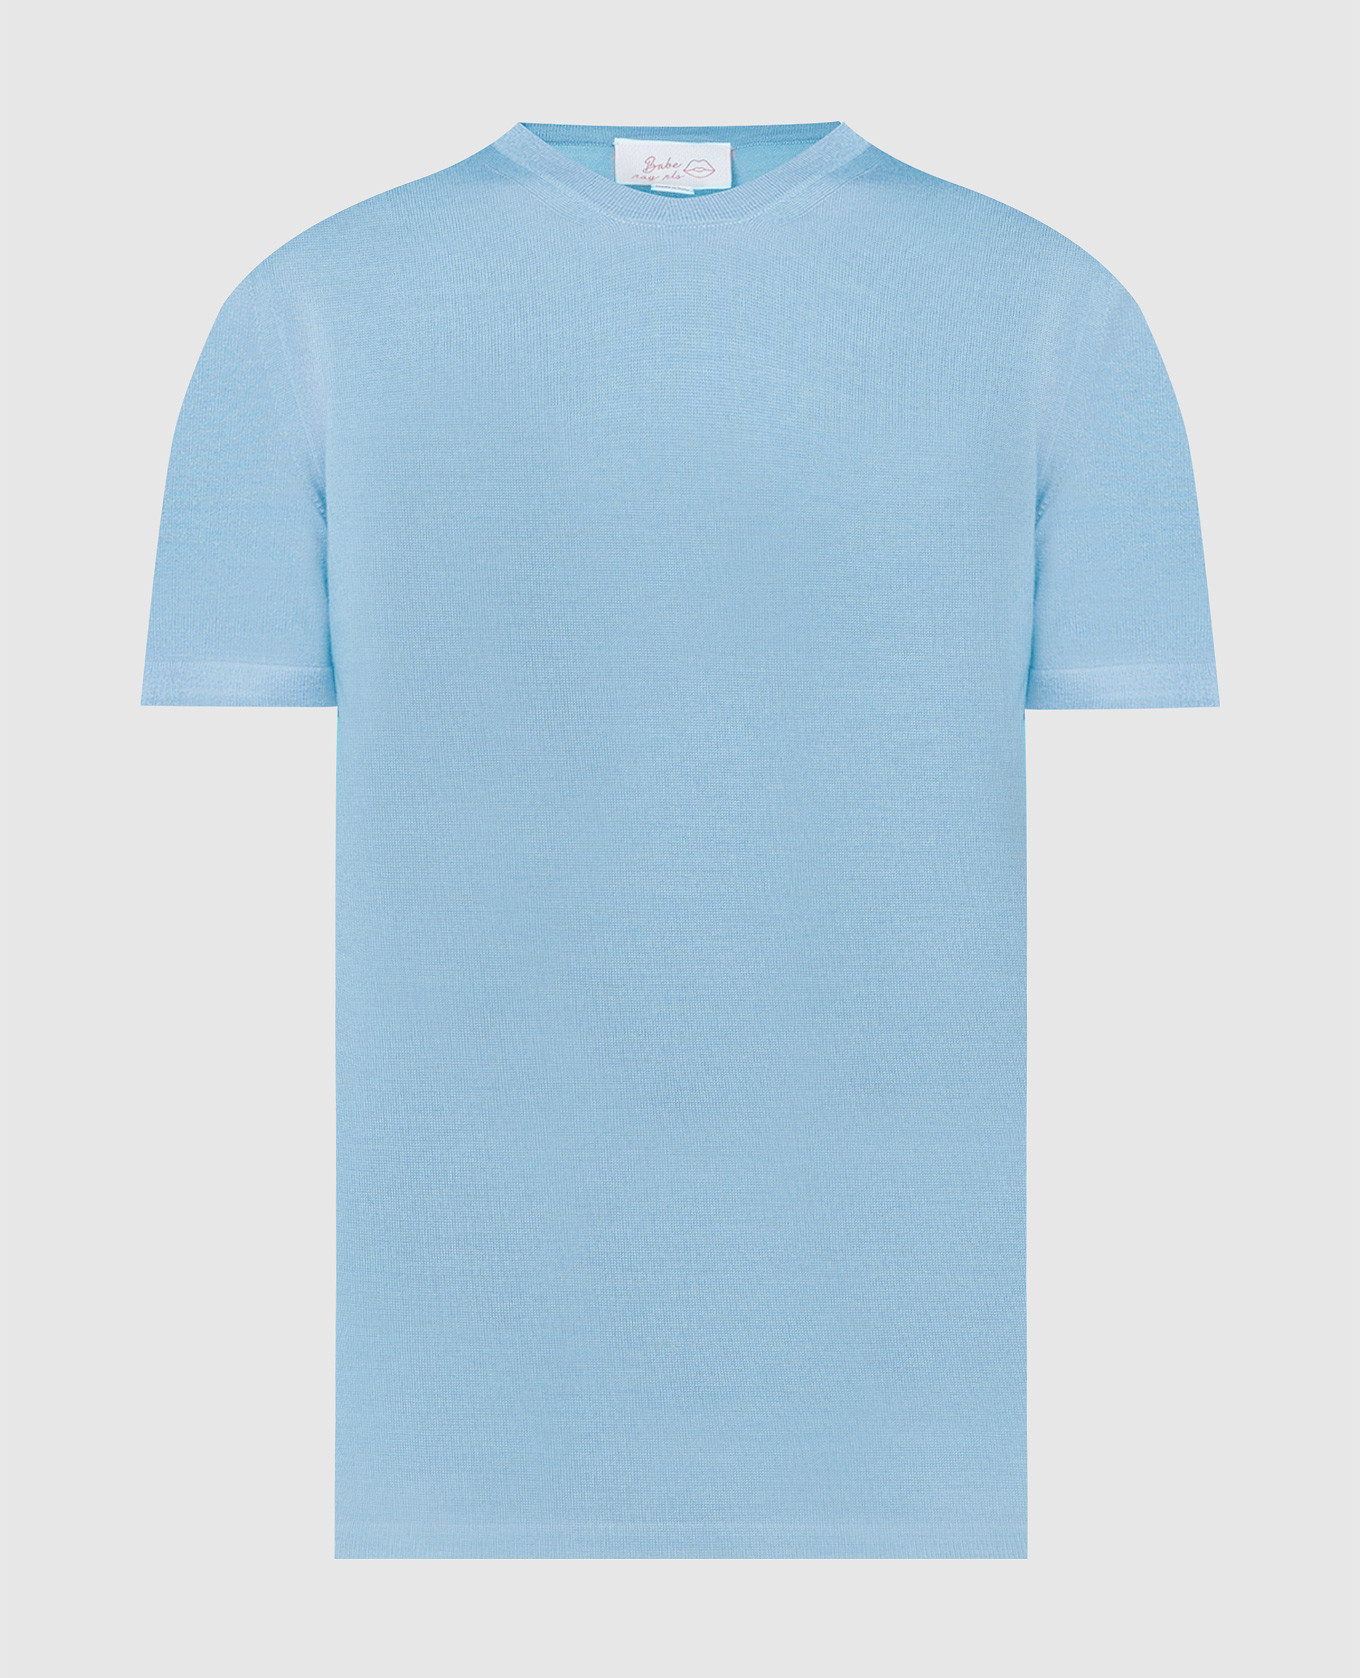 Blue T-shirt made of wool, silk and cashmere